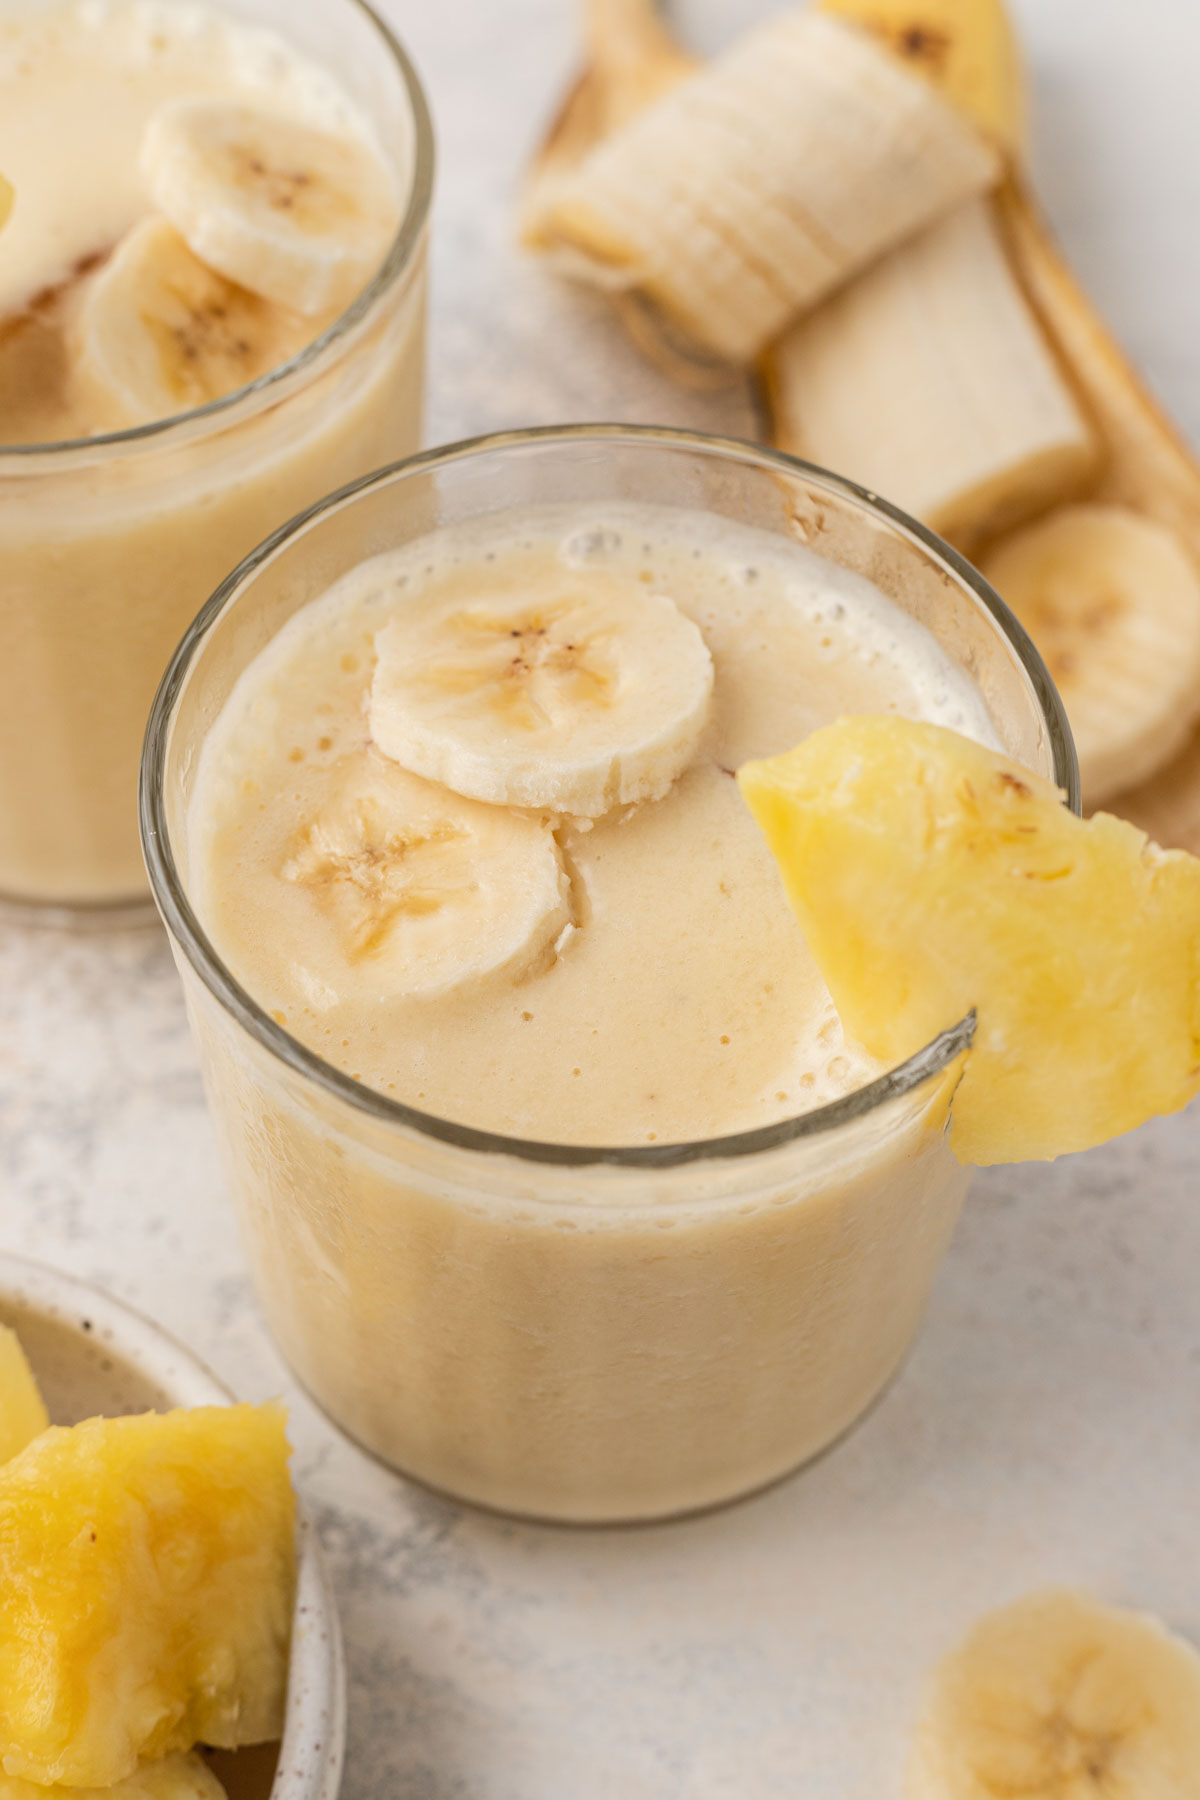 pineapple banana smoothie in a clear glass with sliced banana and pineapple on top